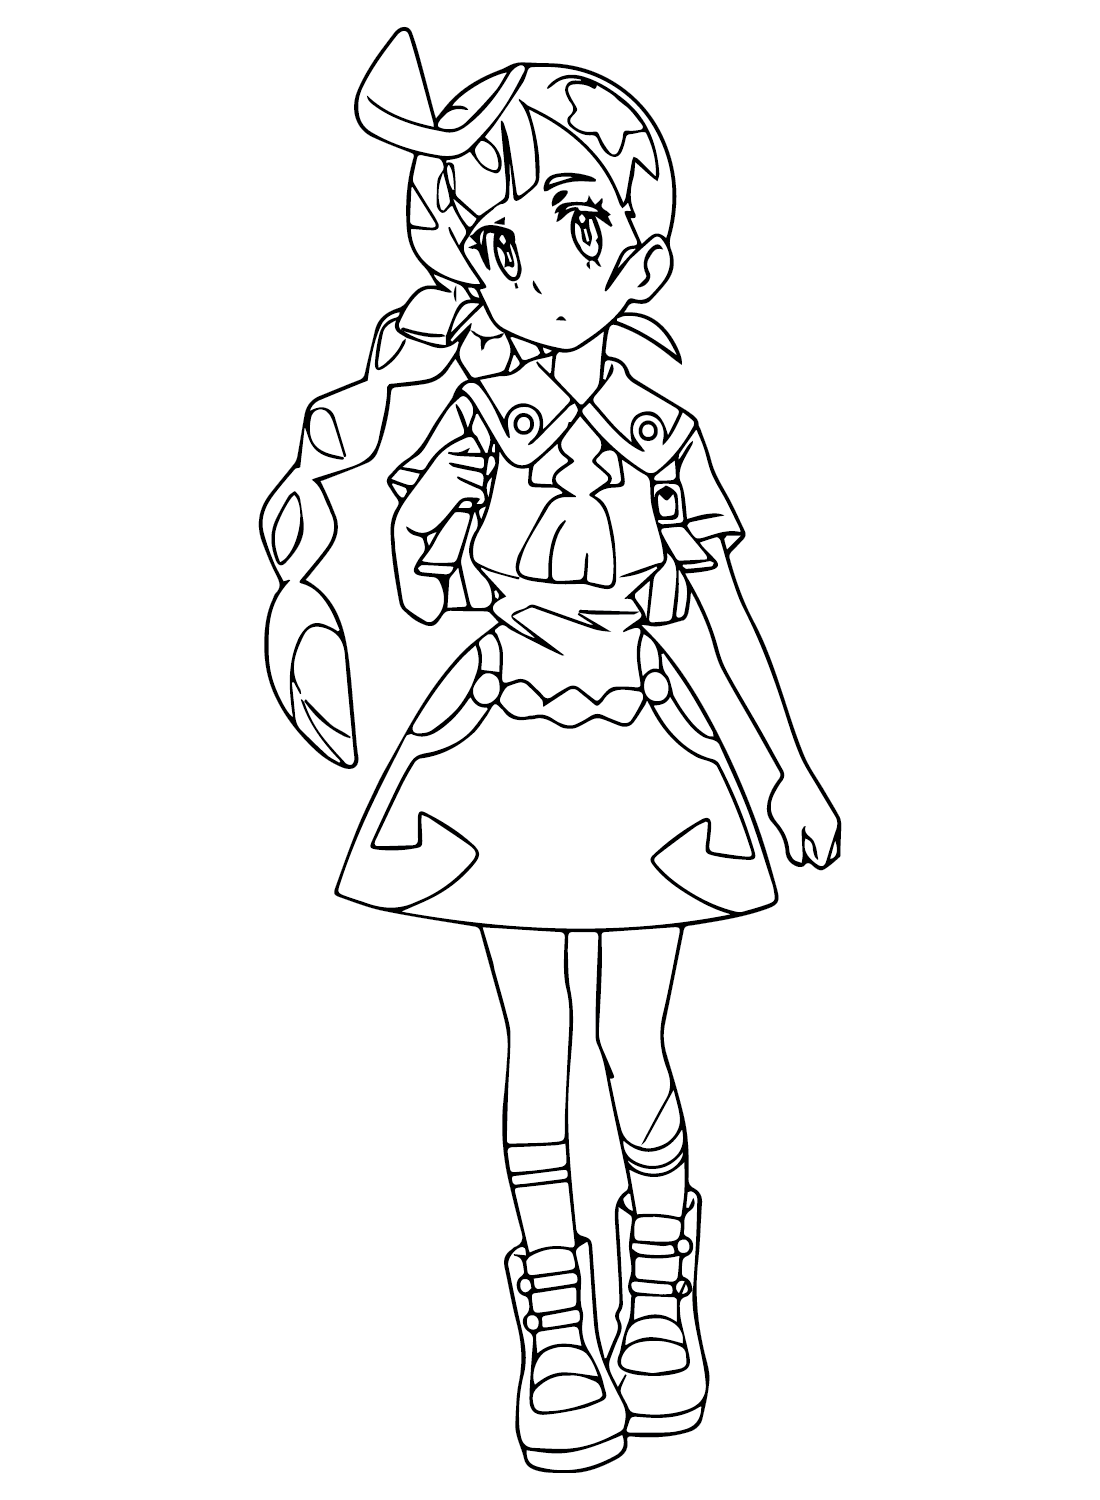 Chloe Cerise Pokemon Color Page - Free Printable Coloring Pages